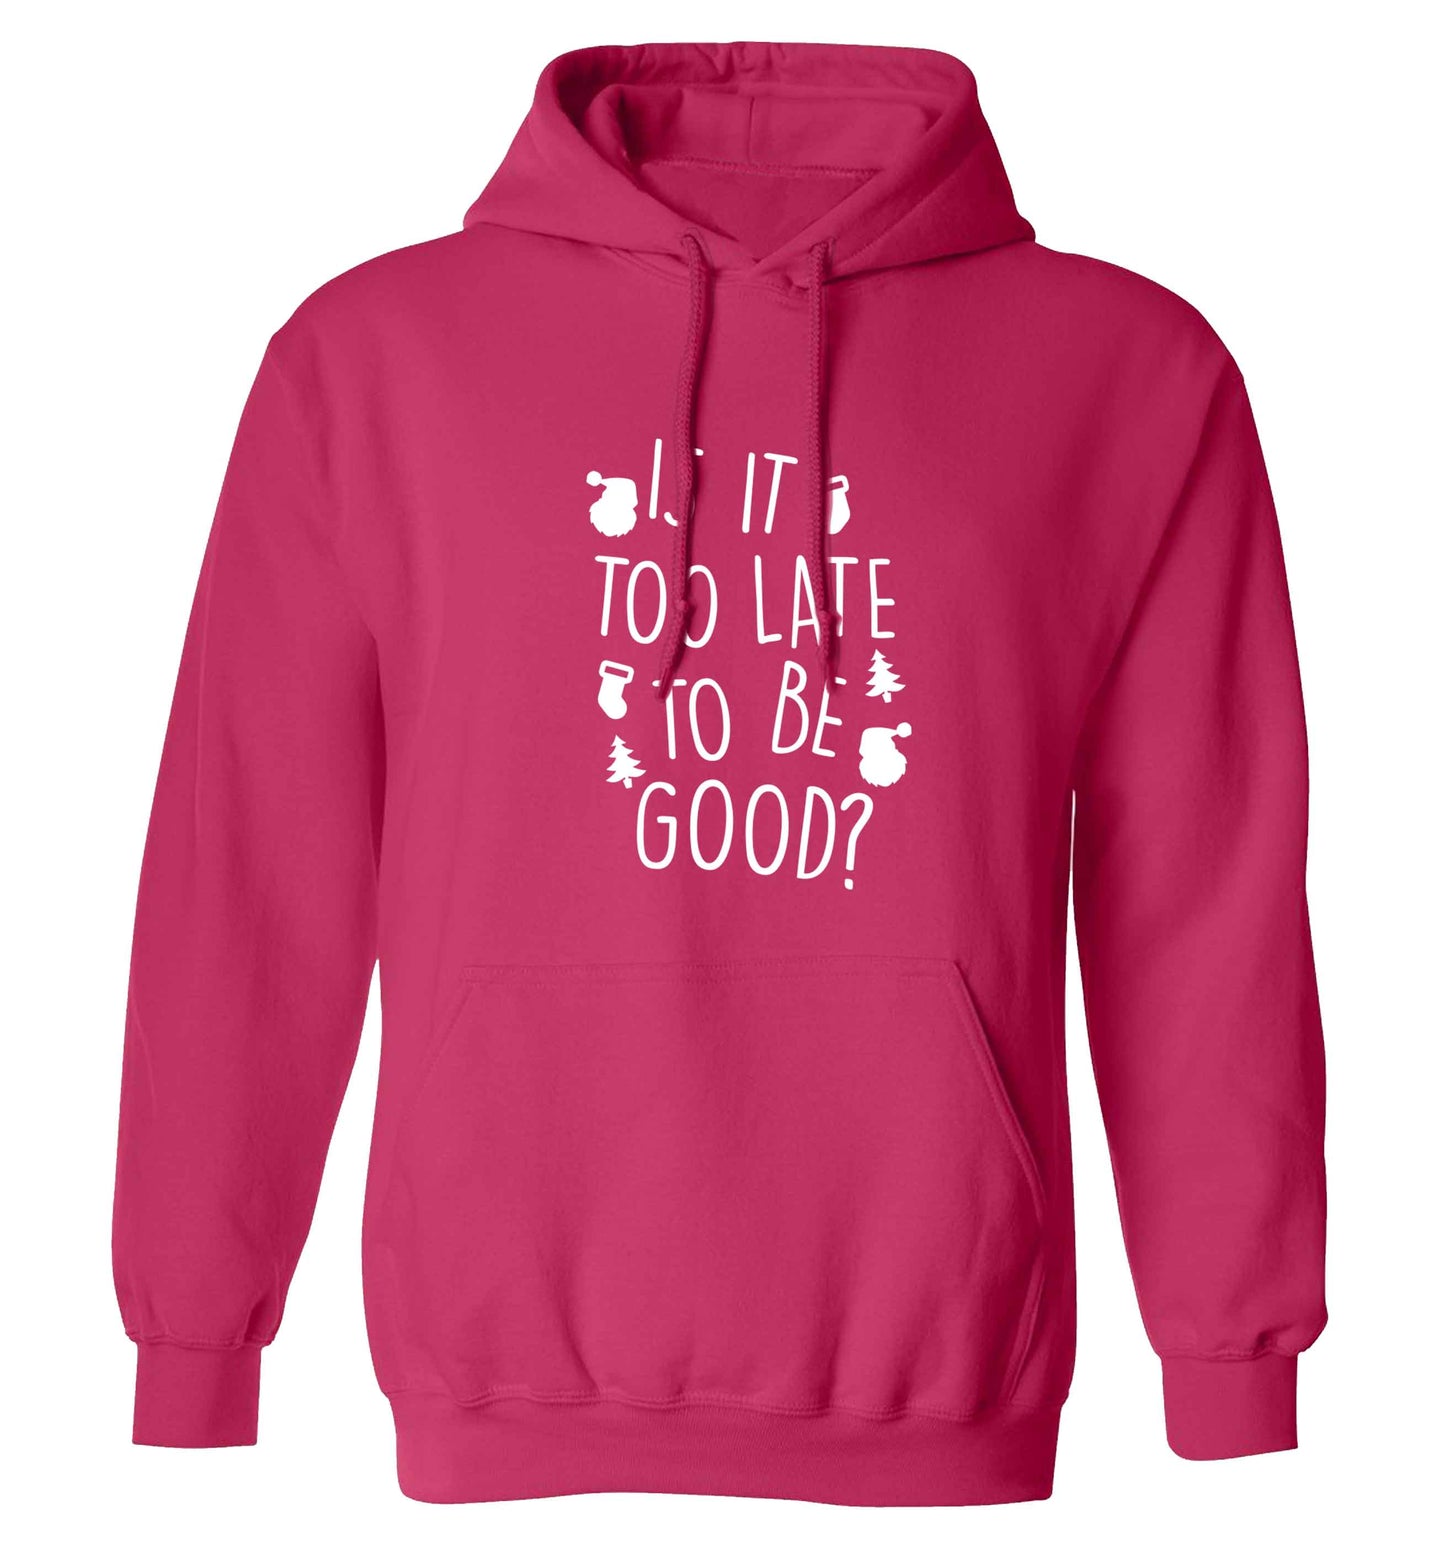 Too Late to be Good adults unisex pink hoodie 2XL